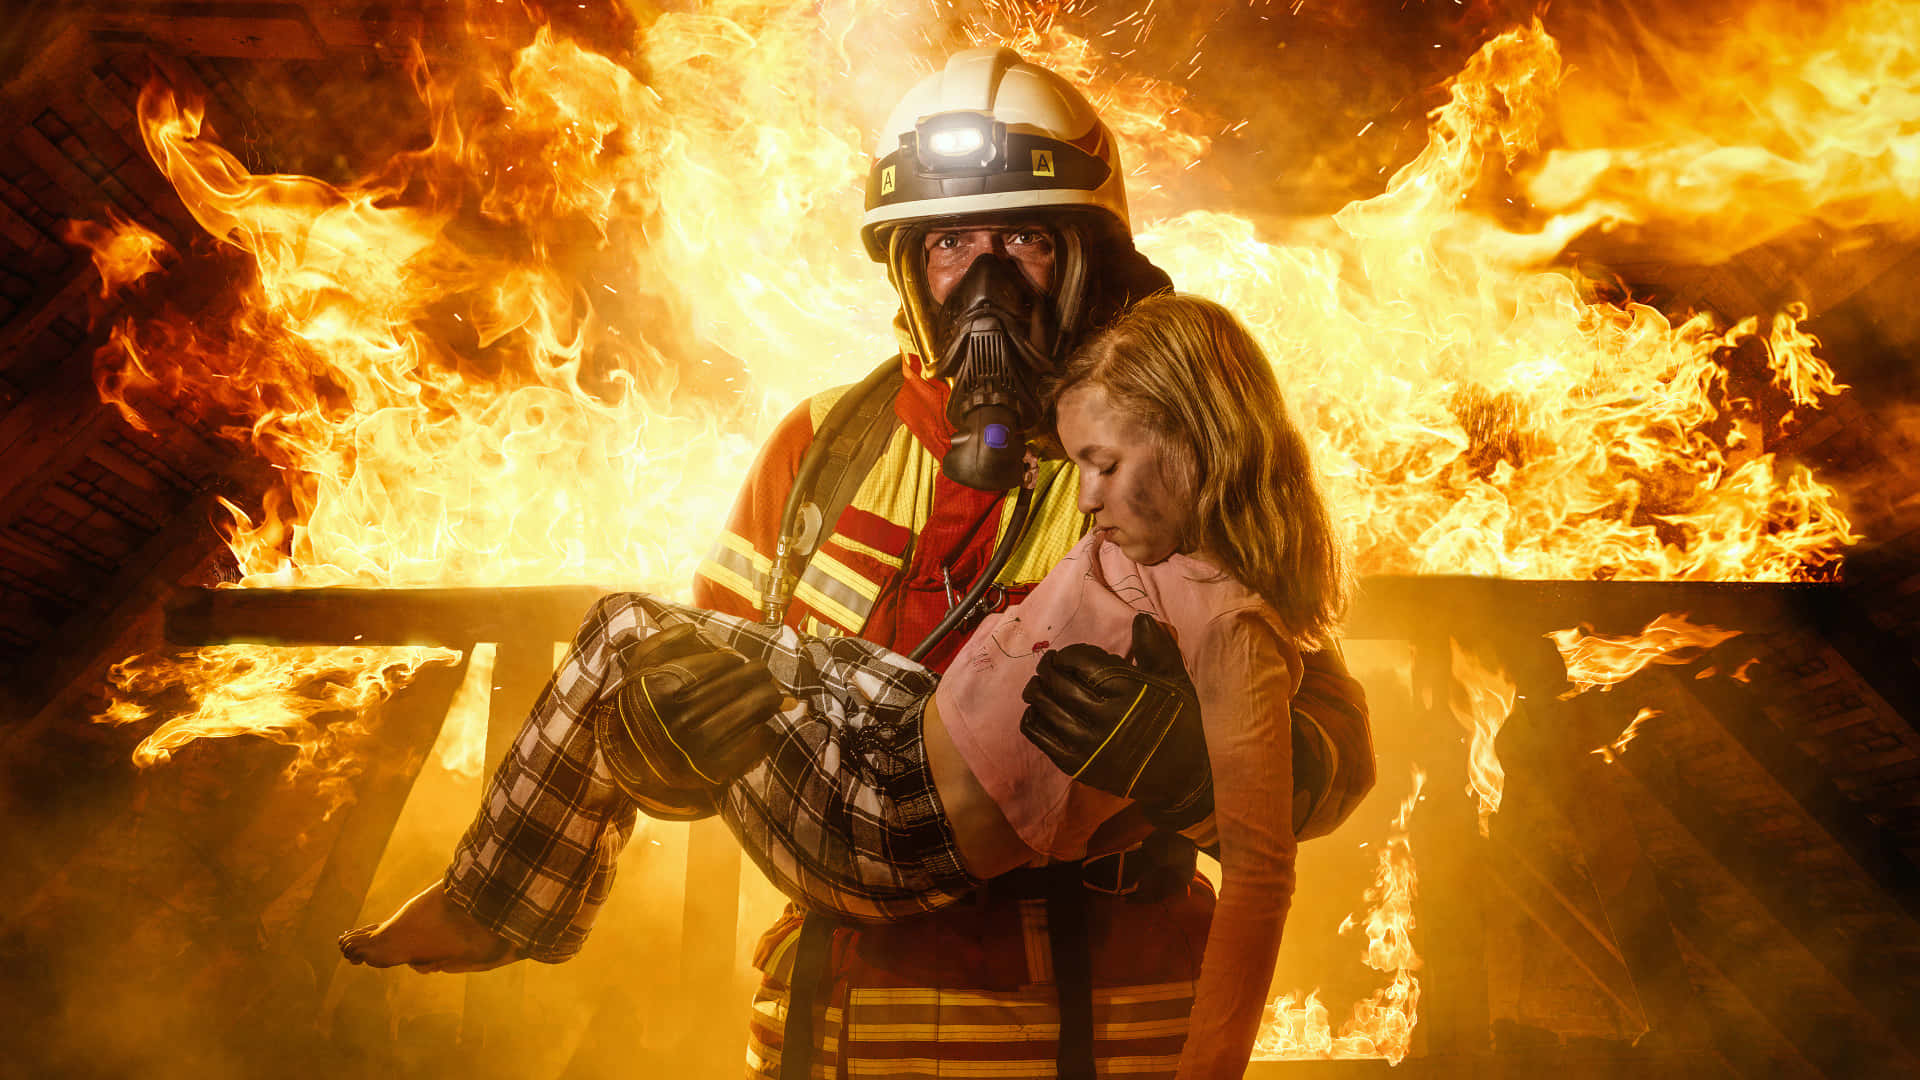 Firefighter Pictures Wallpaper